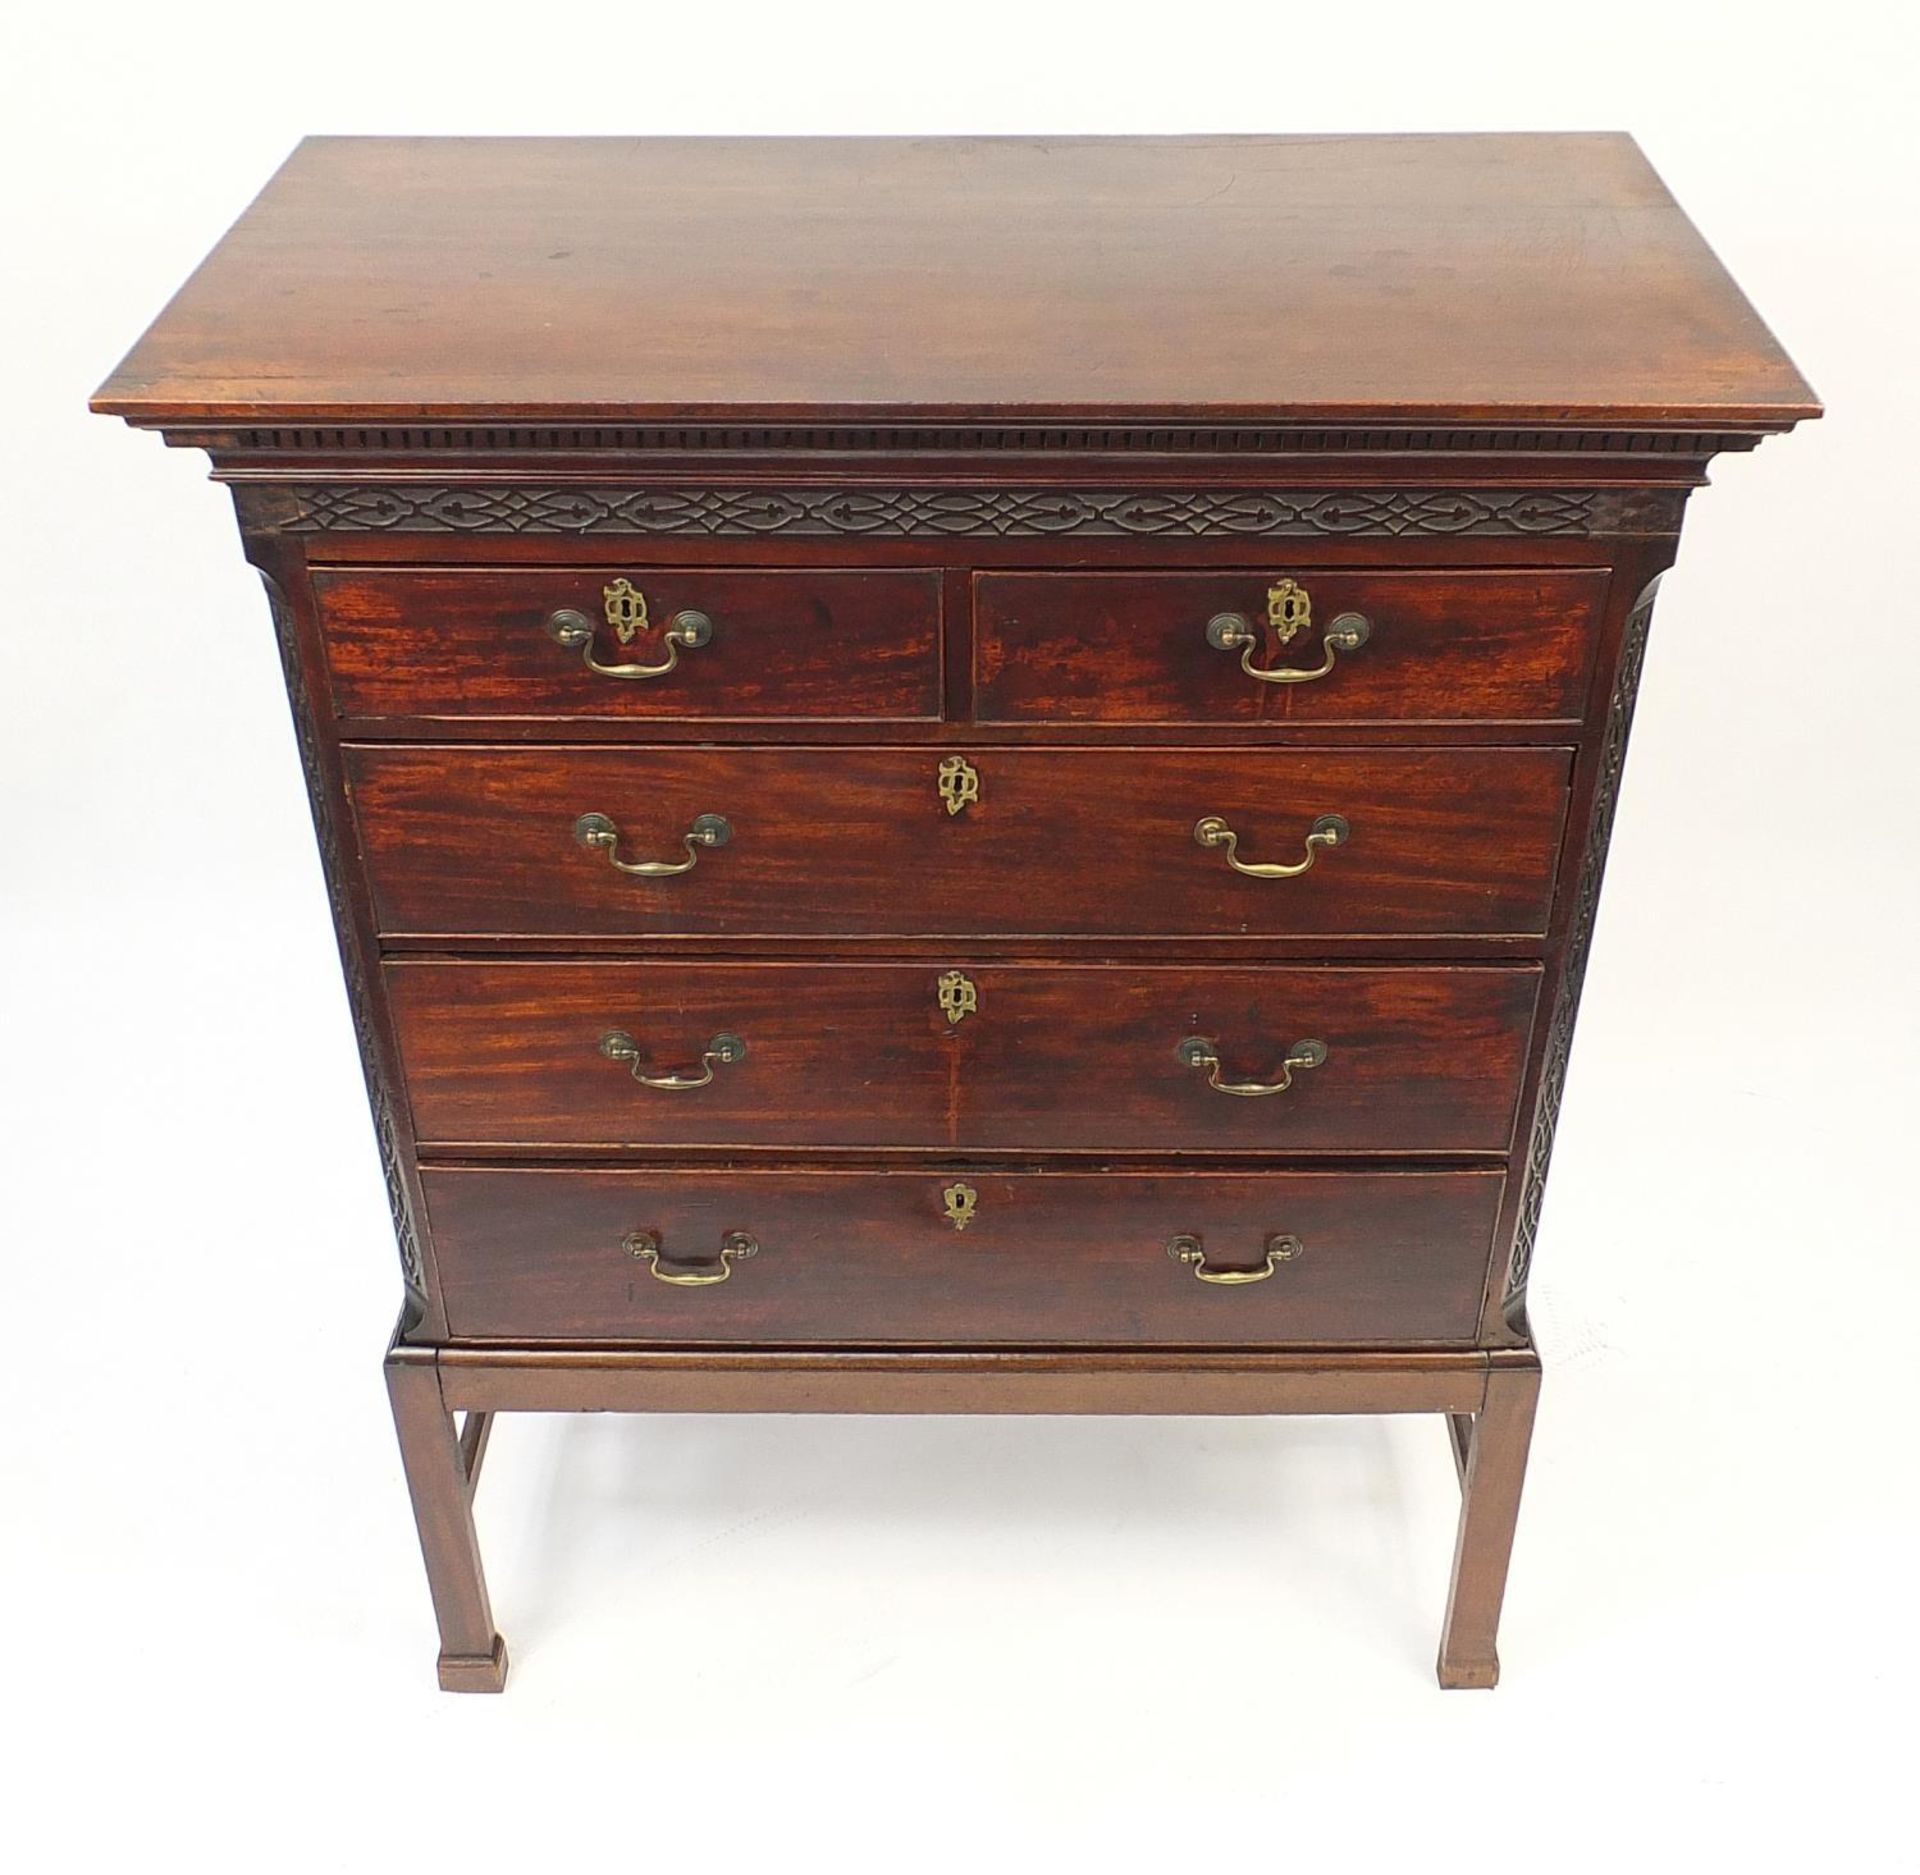 Antique mahogany five drawer chest on stand with blind fretwork, 147cm H x 116cm W x 57.5cm D : - Image 3 of 4